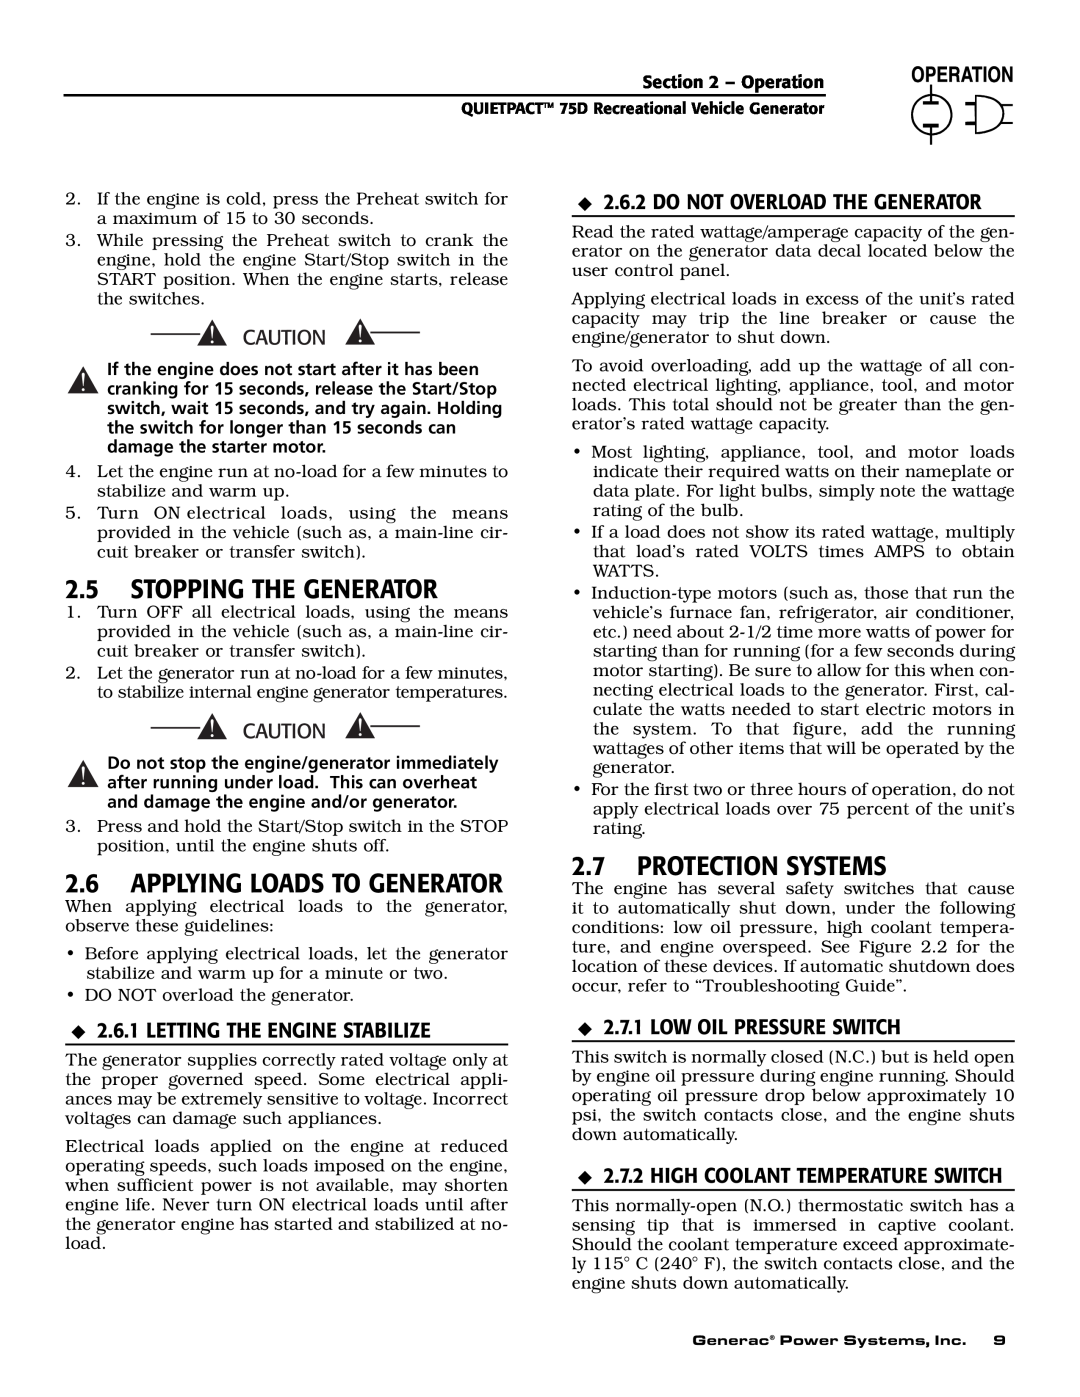 Guardian Technologies 004270-2 owner manual Stopping The Generator, Protection Systems, Applying Loads To Generator 